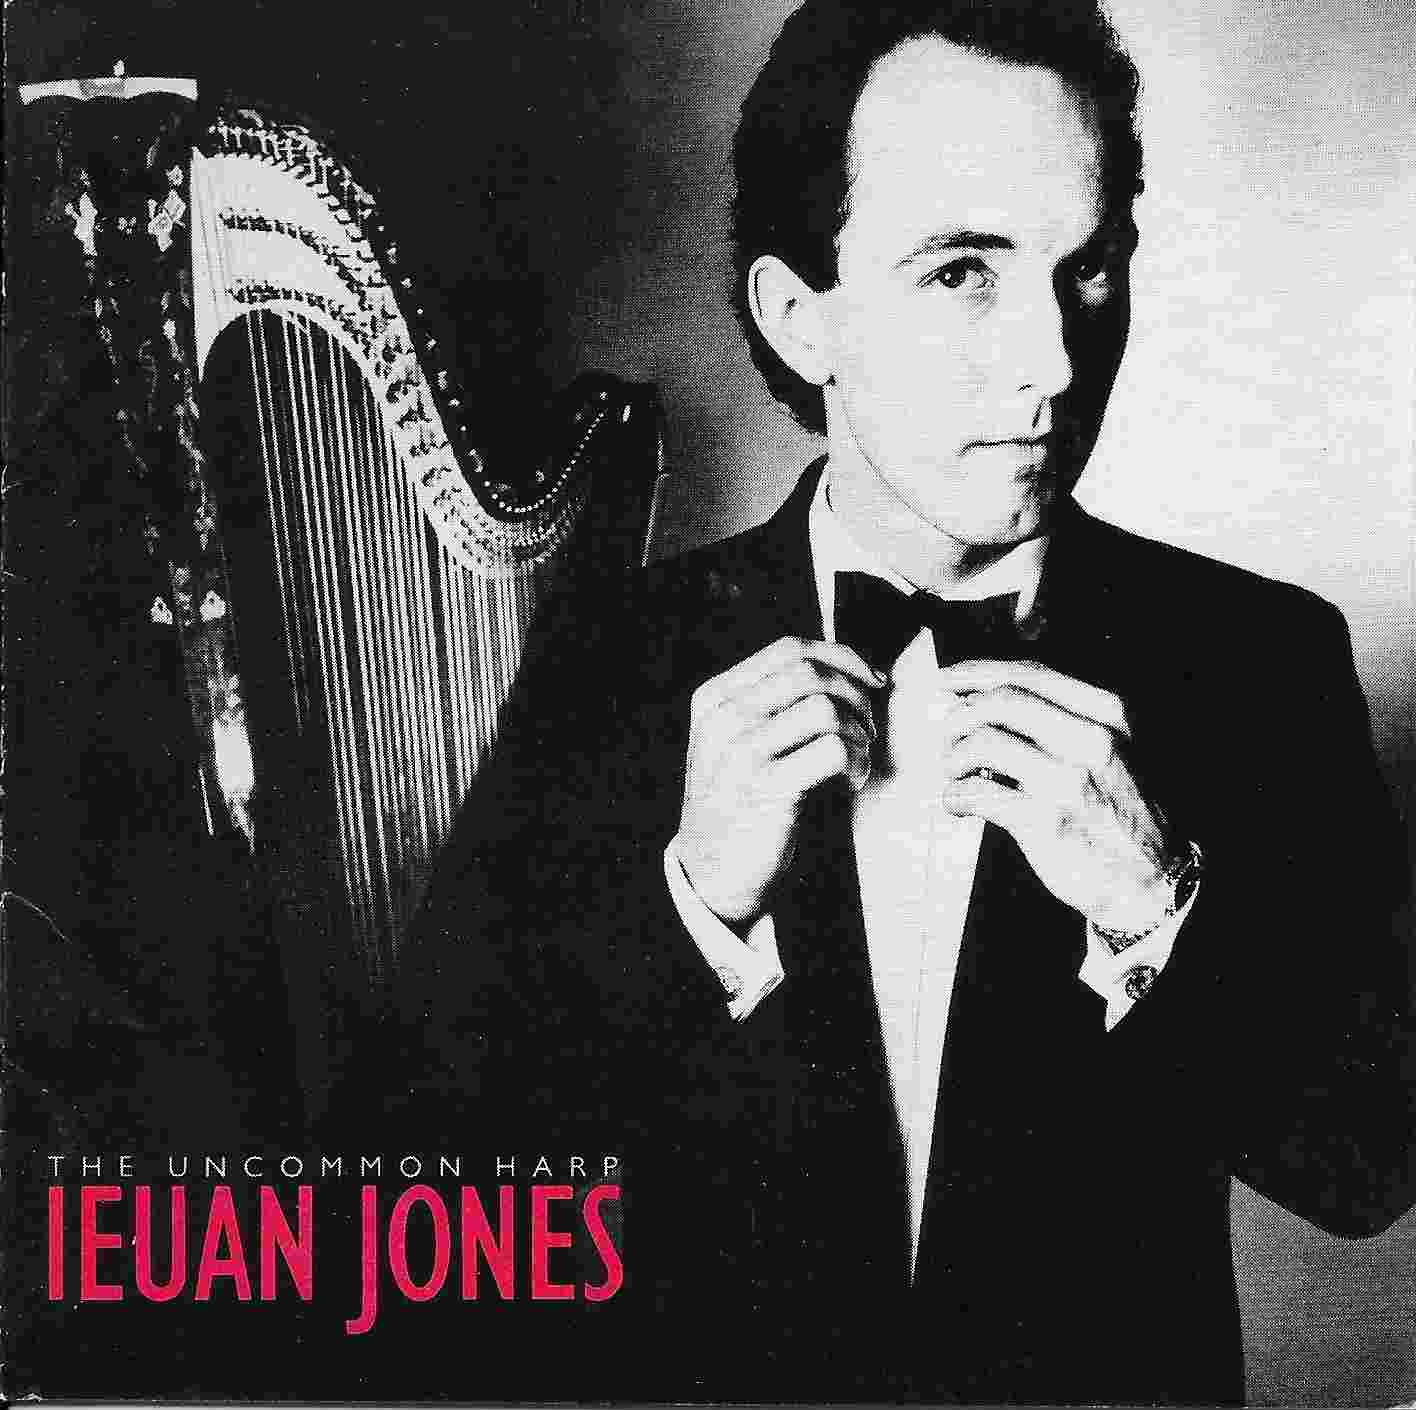 Picture of BBCCD636 The uncommon harp - Ieuan Jones by artist Ieuan Jones from the BBC cds - Records and Tapes library